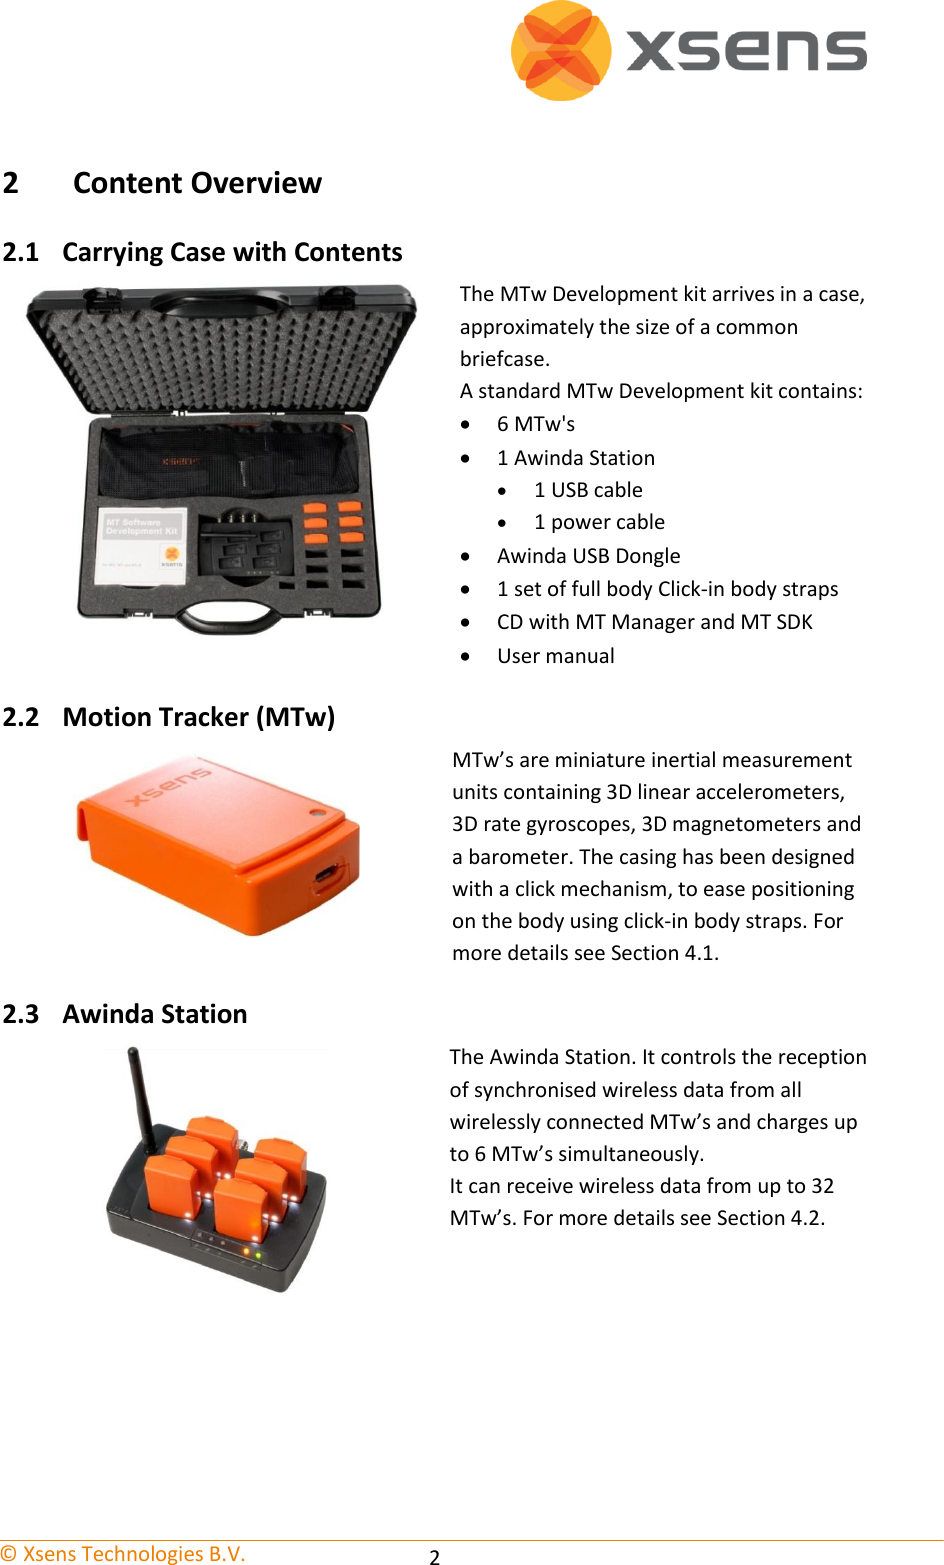   © Xsens Technologies B.V.   2 2 Content Overview 2.1 Carrying Case with Contents  The MTw Development kit arrives in a case, approximately the size of a common briefcase. A standard MTw Development kit contains:  6 MTw&apos;s  1 Awinda Station  1 USB cable  1 power cable  Awinda USB Dongle  1 set of full body Click-in body straps  CD with MT Manager and MT SDK  User manual 2.2 Motion Tracker (MTw)  MTw’s are miniature inertial measurement units containing 3D linear accelerometers, 3D rate gyroscopes, 3D magnetometers and a barometer. The casing has been designed with a click mechanism, to ease positioning on the body using click-in body straps. For more details see Section 4.1. 2.3 Awinda Station  The Awinda Station. It controls the reception of synchronised wireless data from all wirelessly connected MTw’s and charges up to 6 MTw’s simultaneously. It can receive wireless data from up to 32 MTw’s. For more details see Section 4.2. 